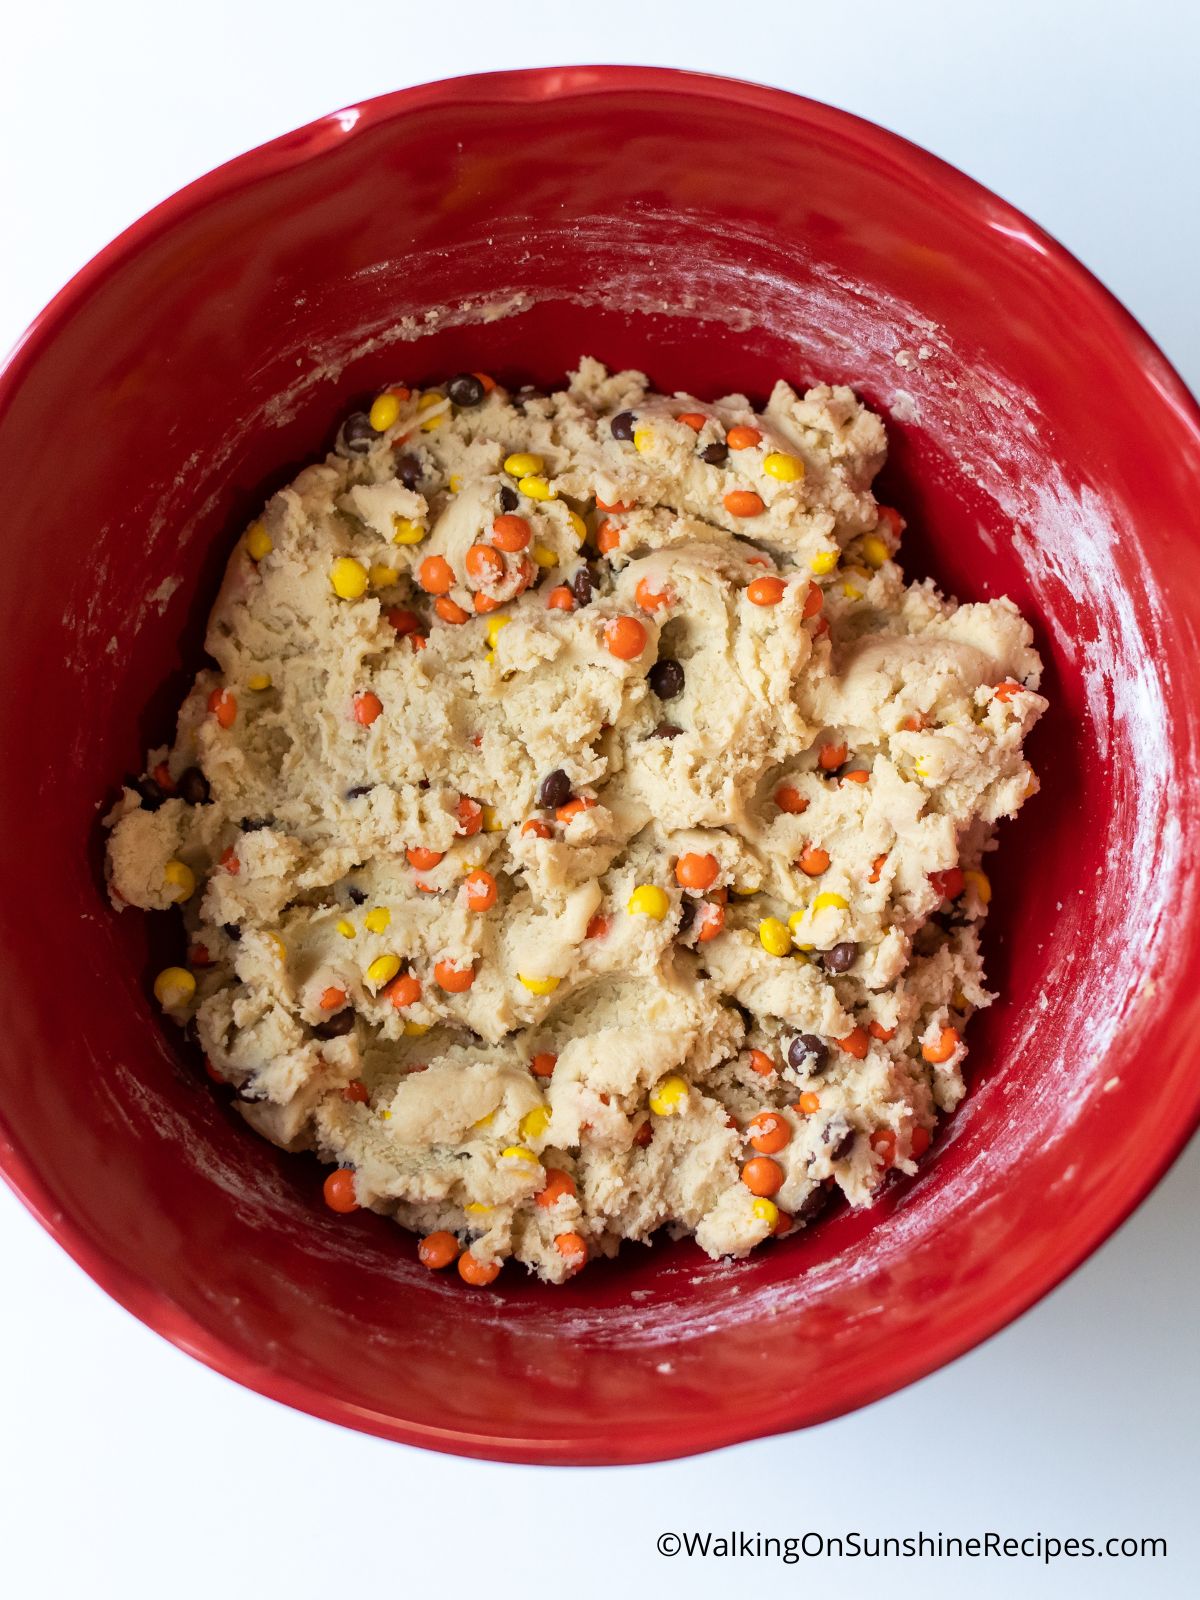 Cookie batter with Reese's pieces combined in red mixing bowl.